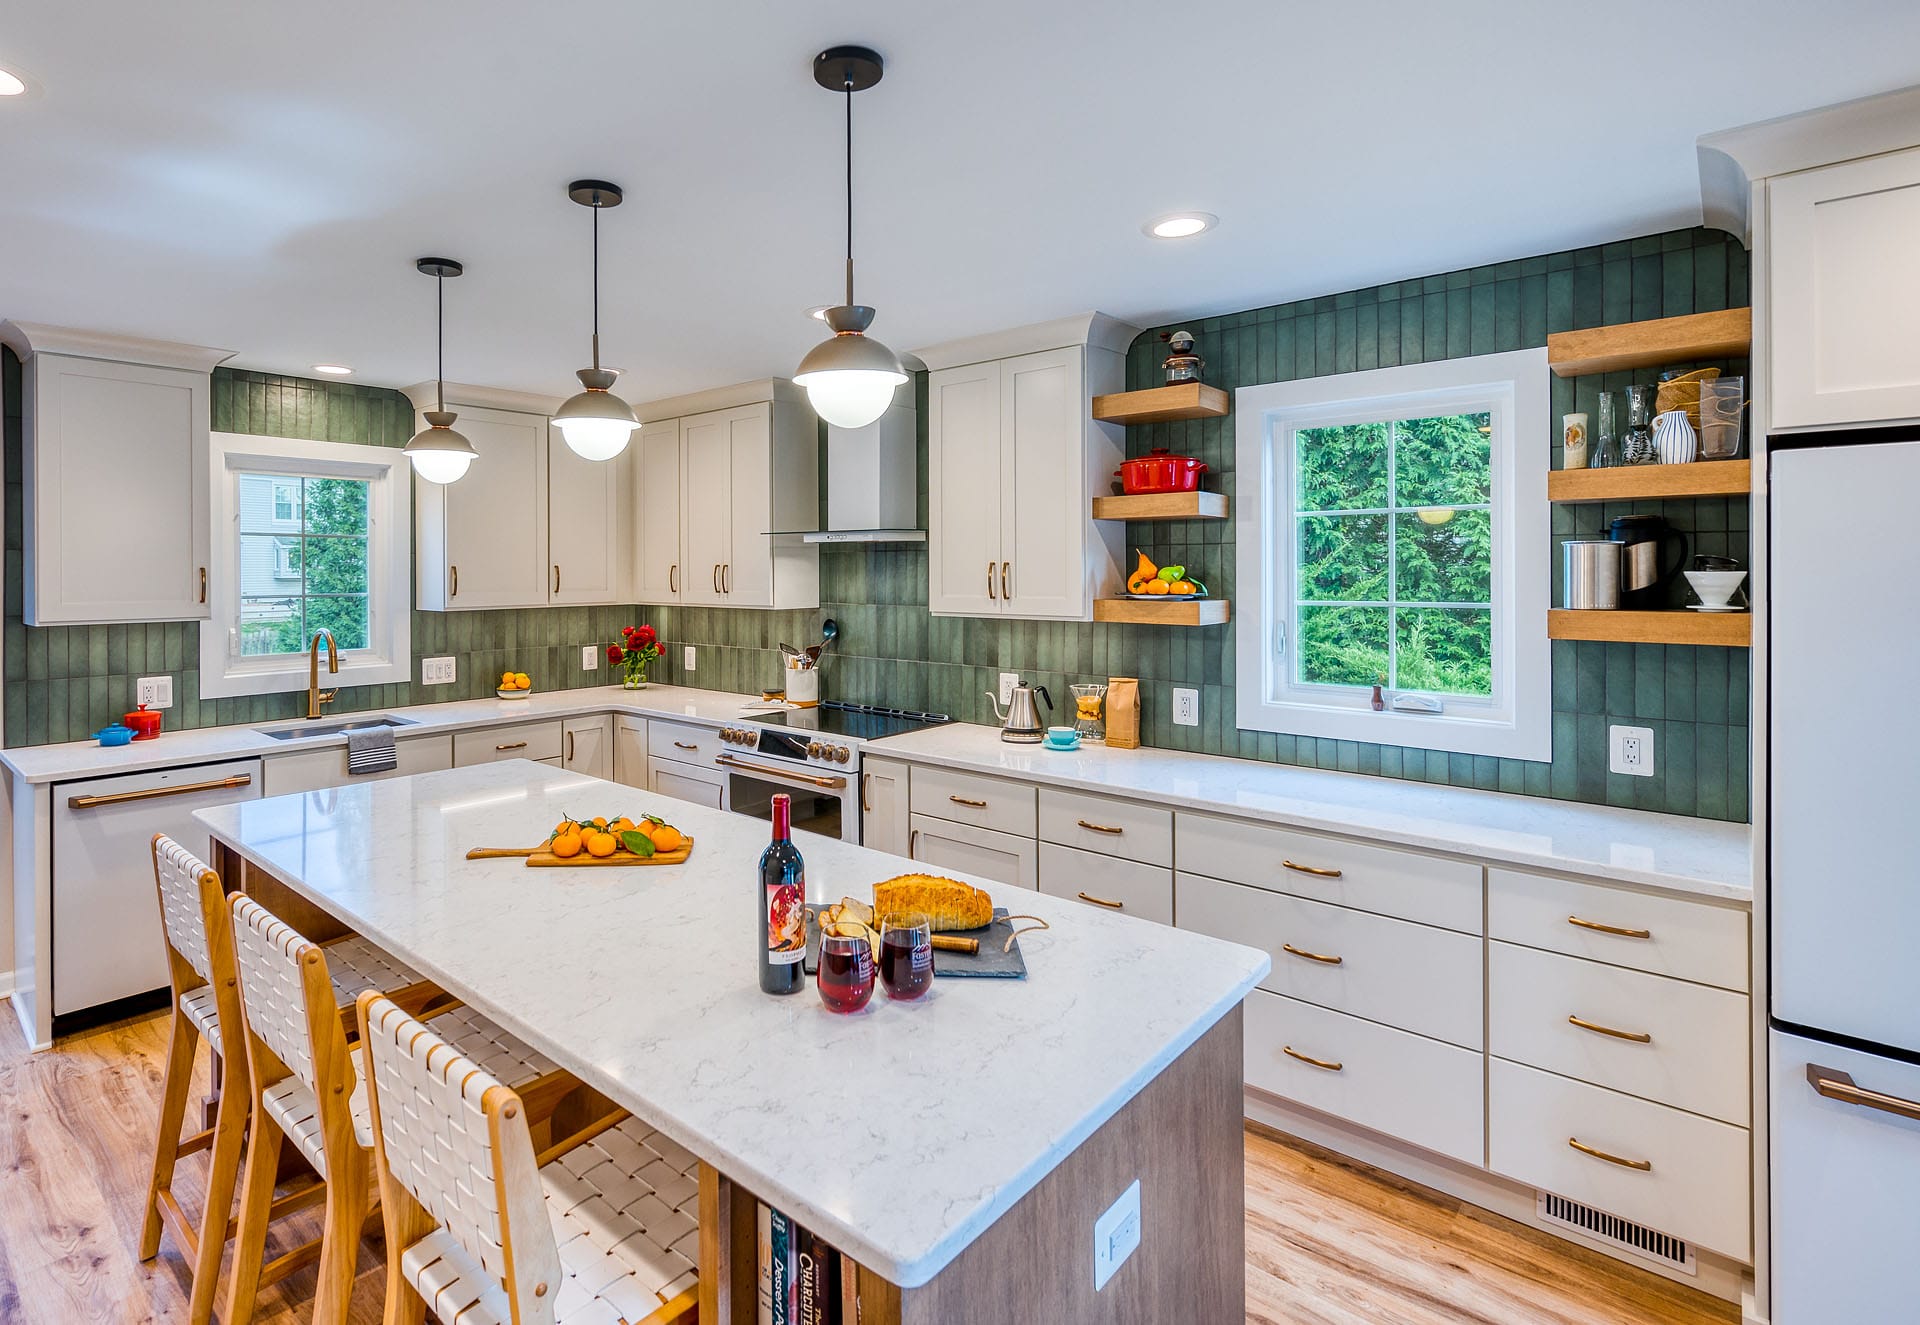 Fairfax, VA kitchen remodel with Shaker style cabinets accented with brushed bronze cabinet pulls an open shelving